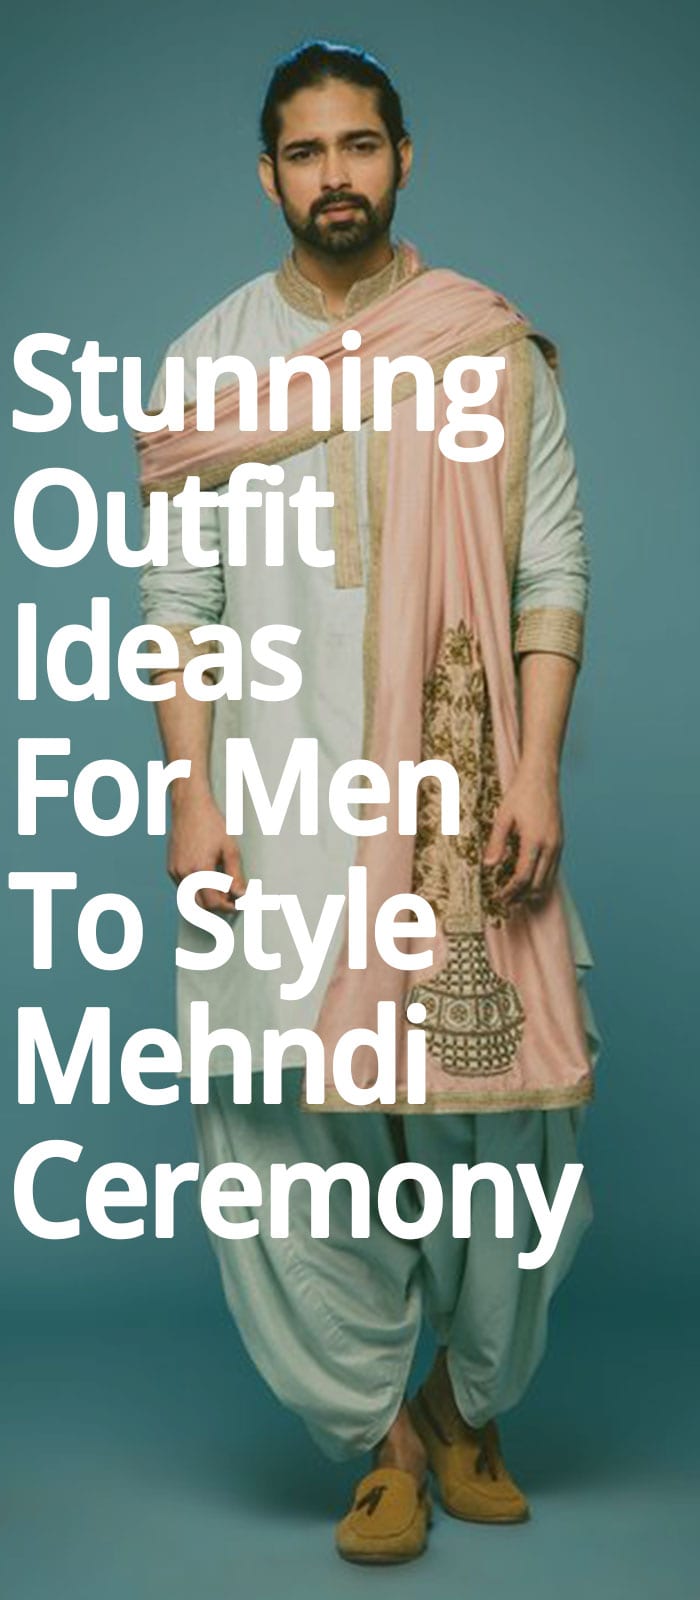 Stunning Outfit Ideas For Men To Style Mehndi Ceremony